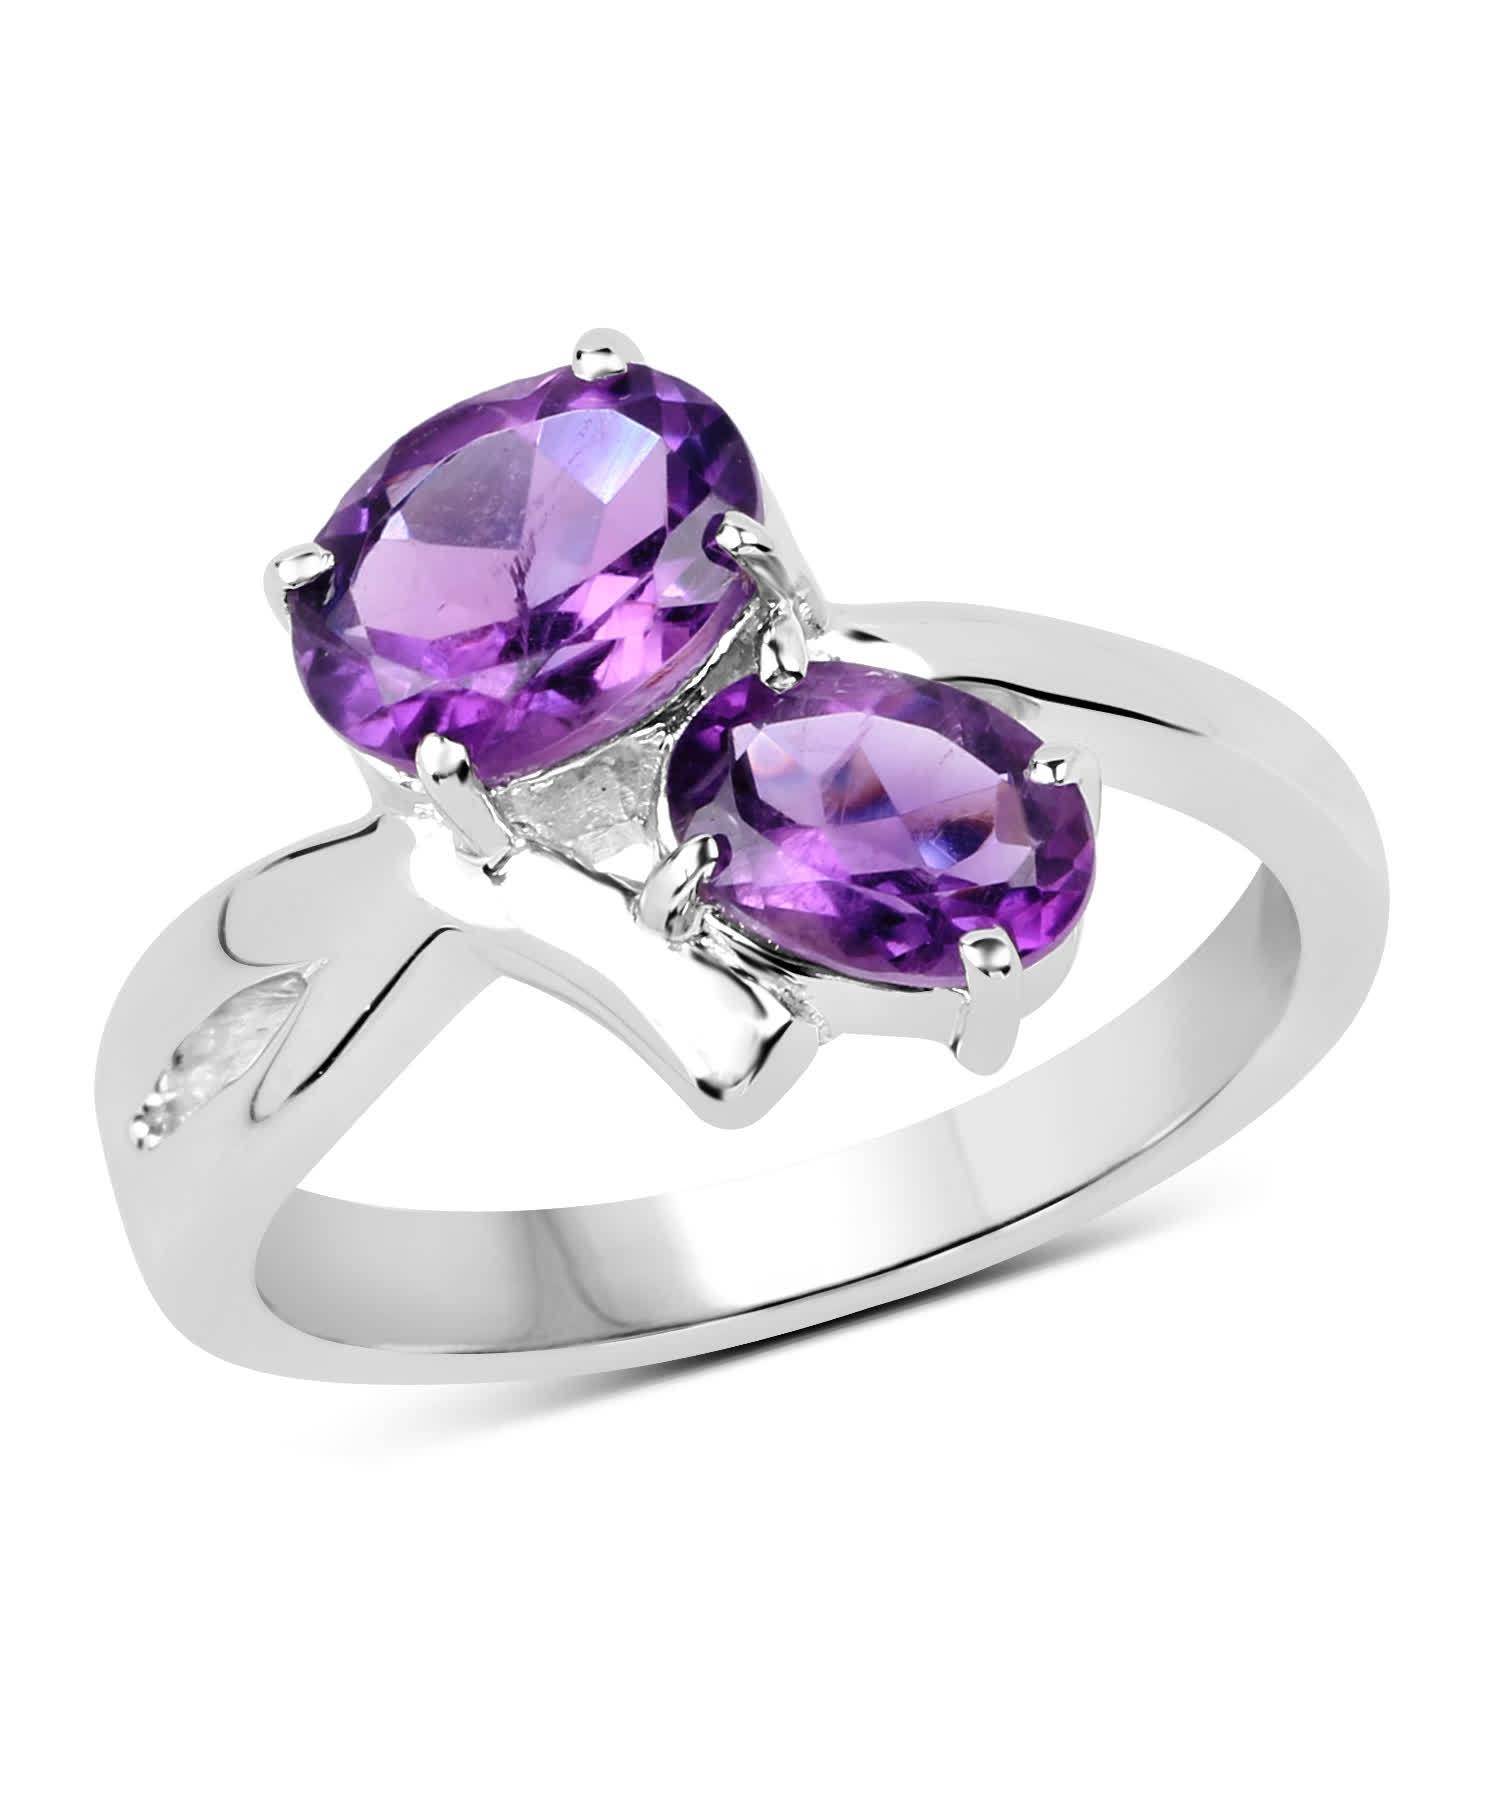 1.95ctw Natural Amethyst Rhodium Plated 925 Sterling Silver Two-Stone Ring View 1